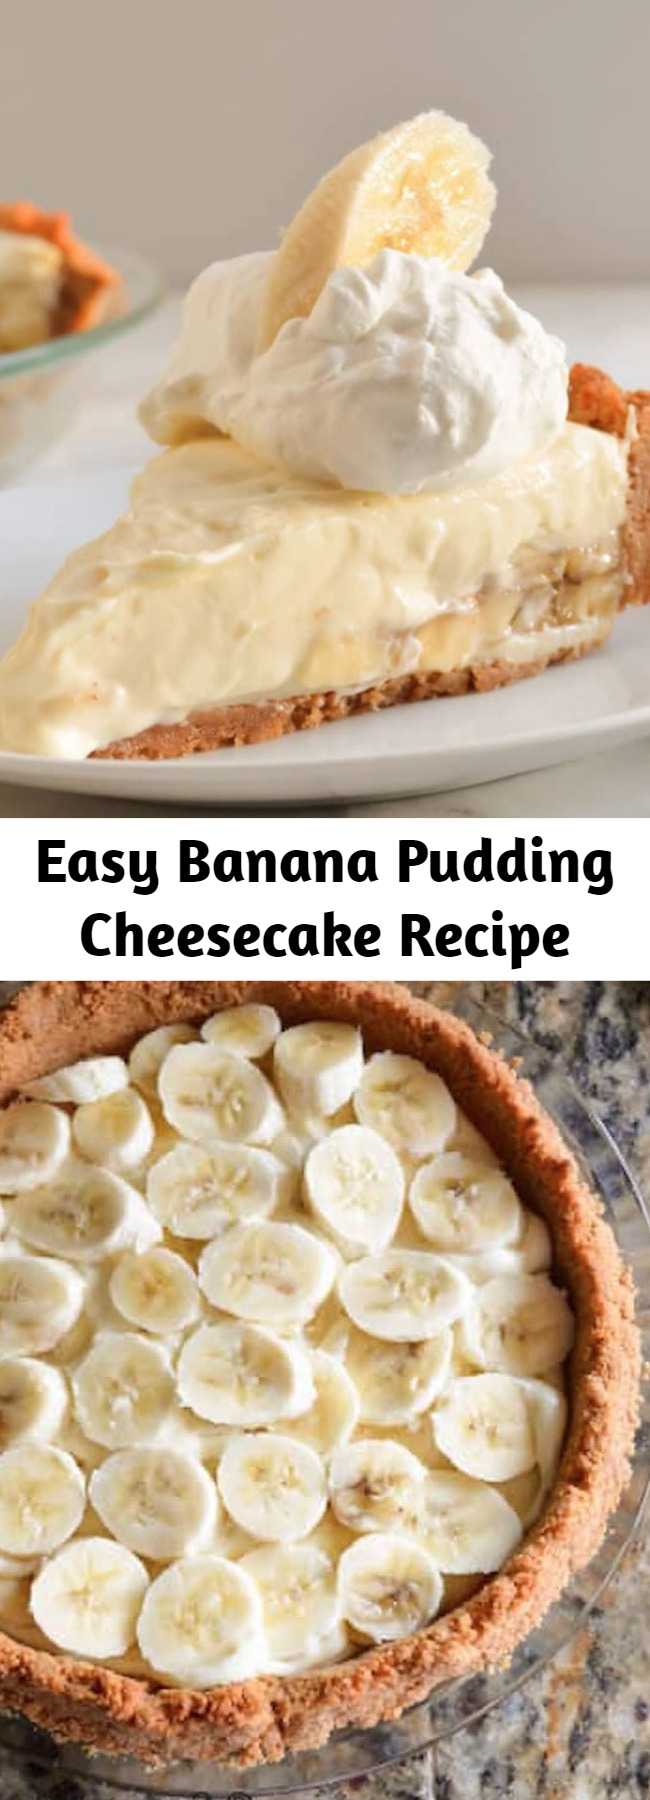 Easy Banana Pudding Cheesecake Recipe - Banana Pudding Cheese is the equivalent of Banana Cream Pie meets No Bake Cheesecake in this easy to make dessert recipe. Perfect for Thanksgiving and Christmas.